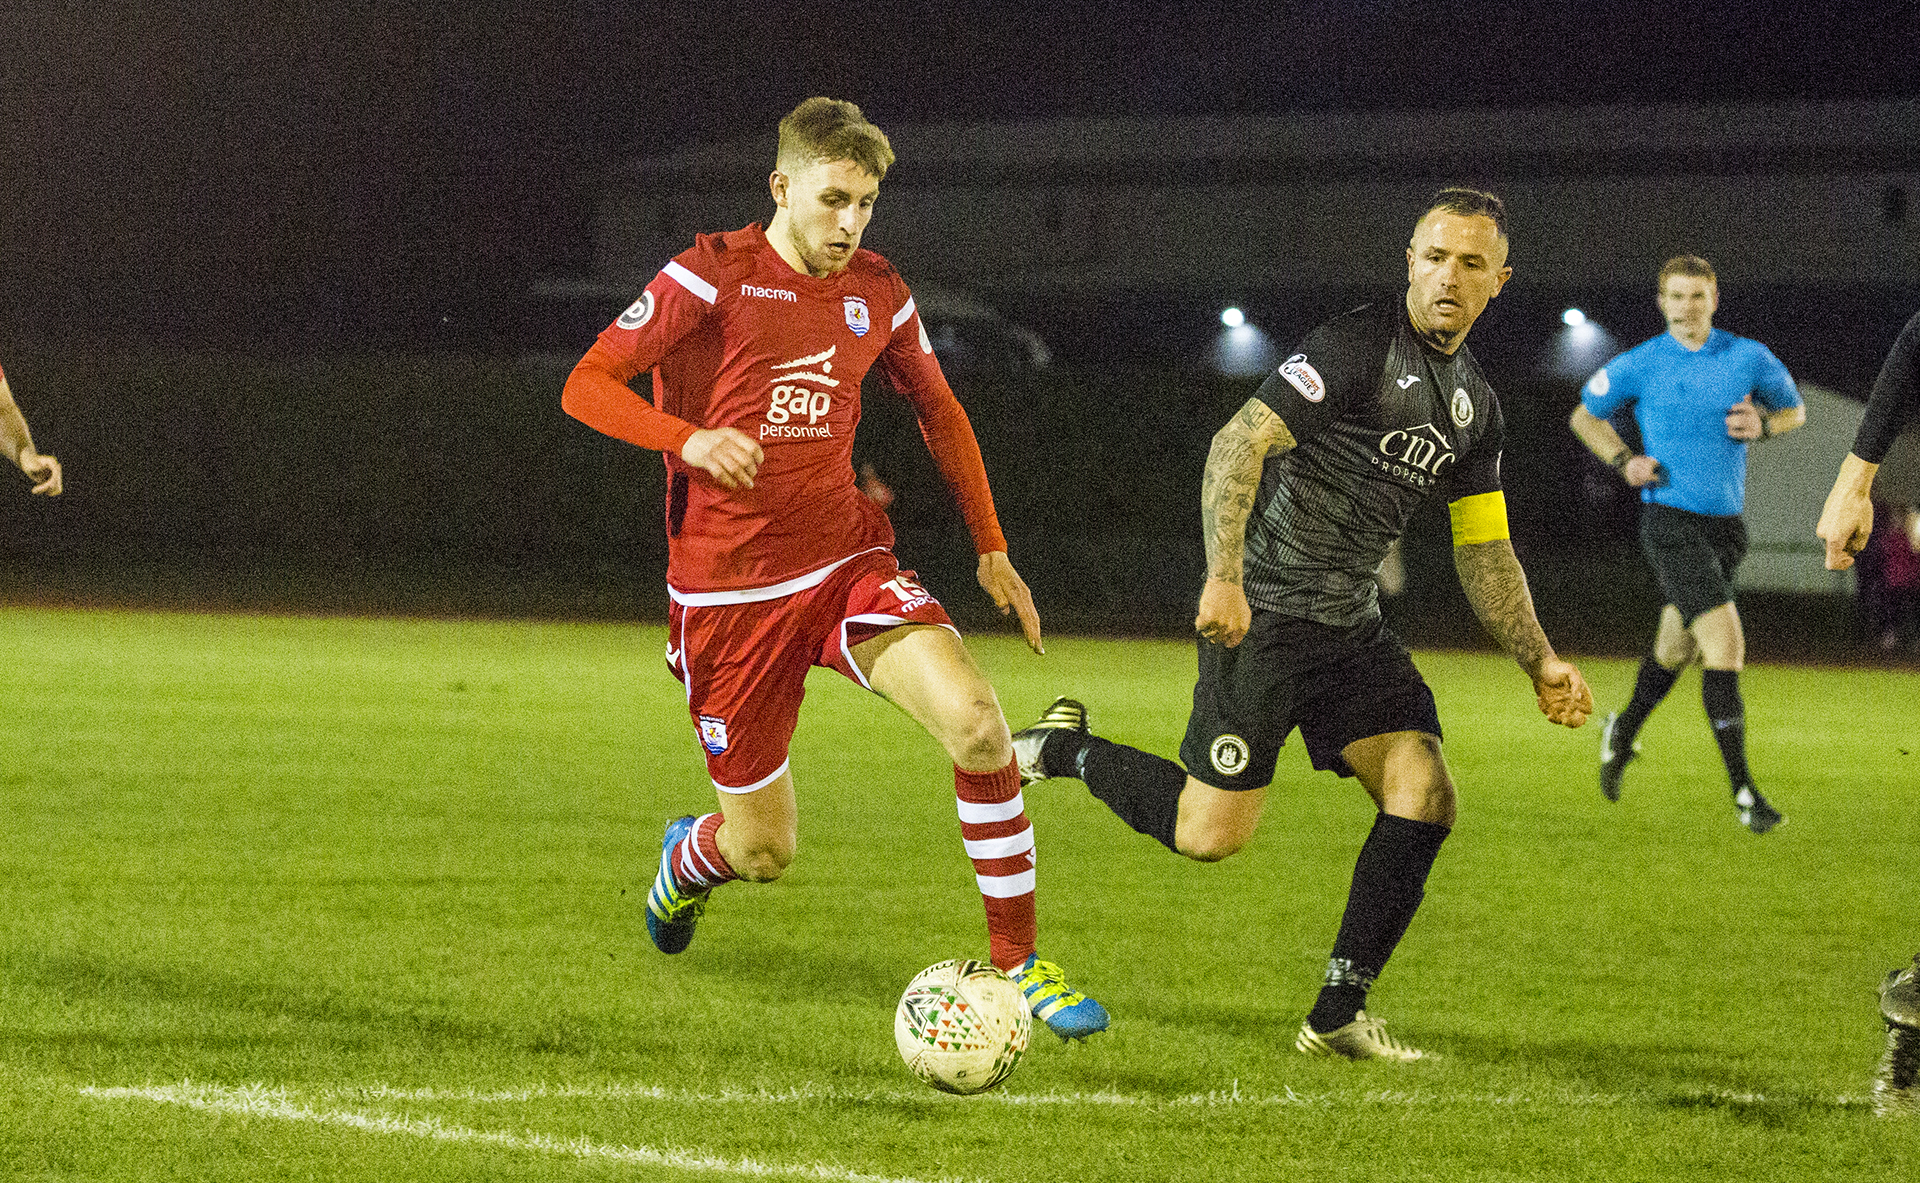 Jake Phillips in action for Connah's Quay Nomads against Edinburgh City in the Irn Bru Cup Semi Final | © NCM Media